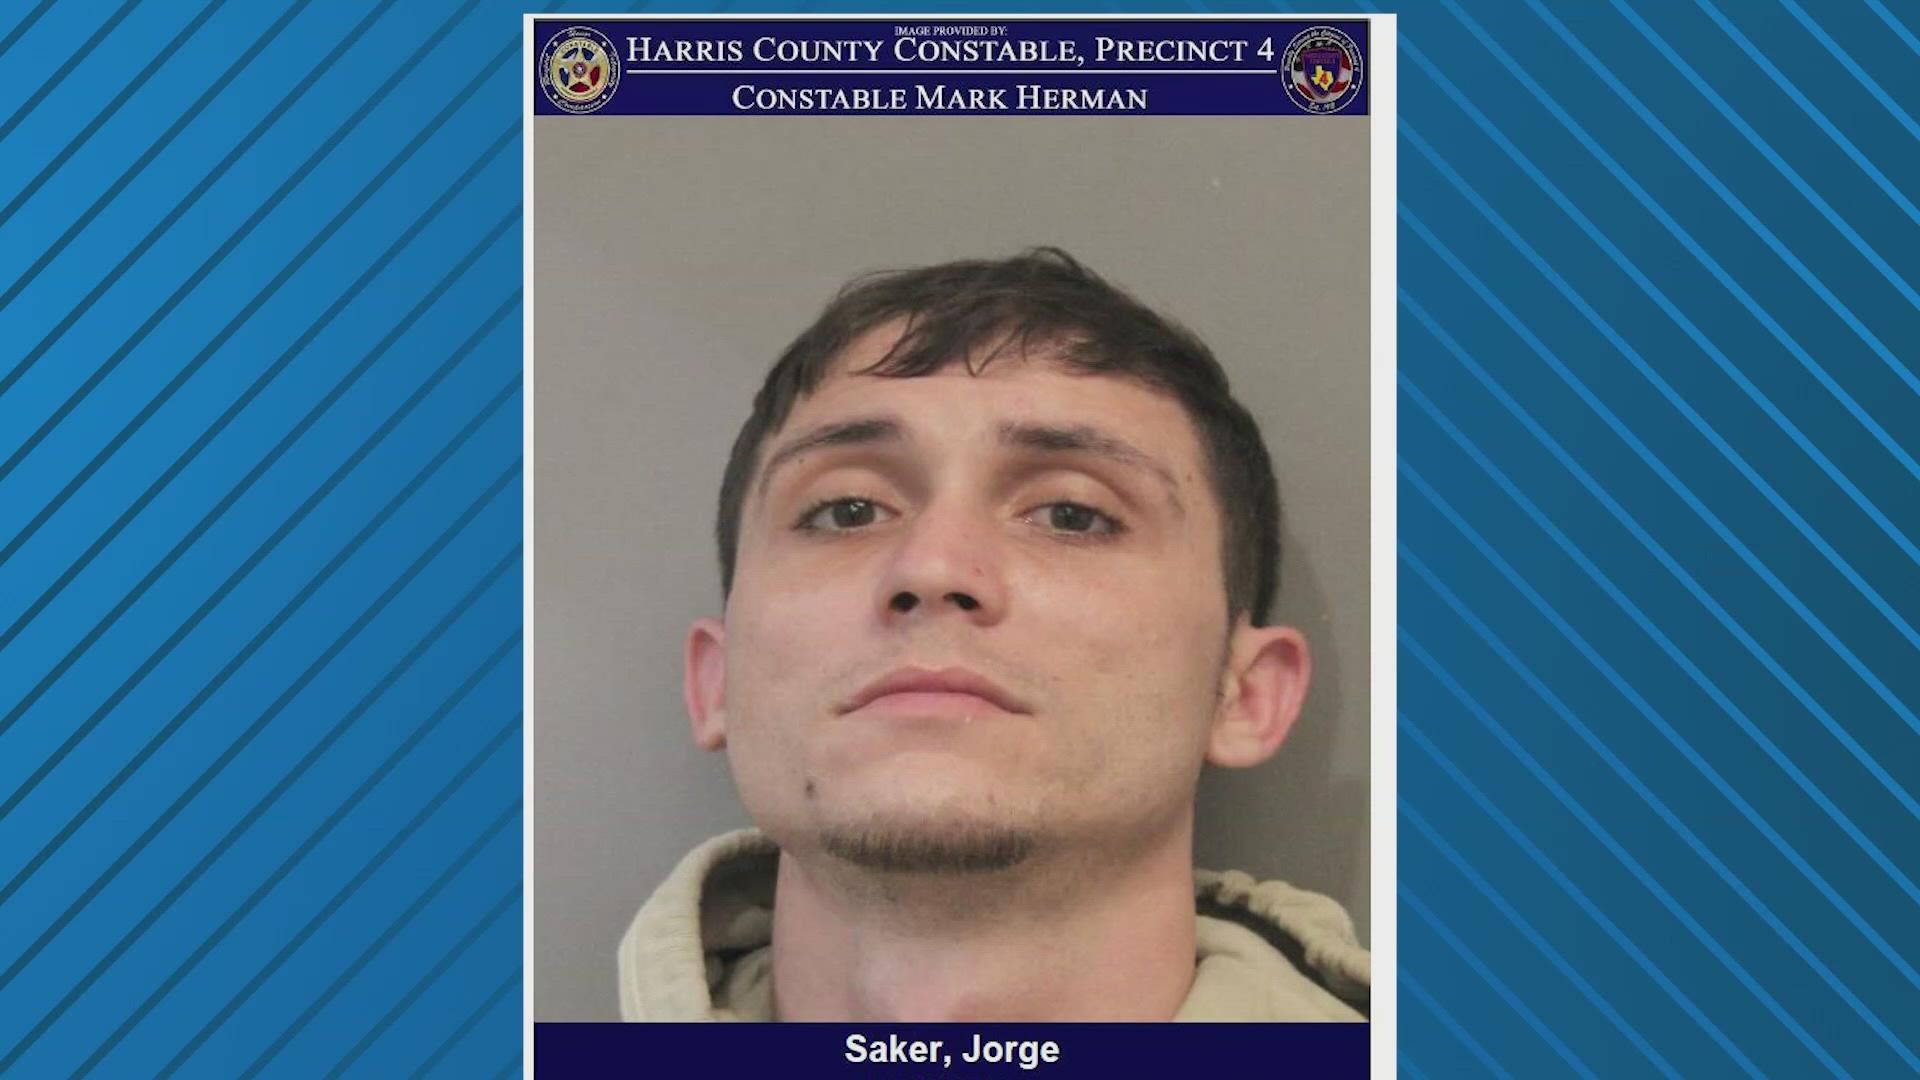 A K-9 officer helped catch two home invasion suspects on Tuesday, according to the Harris County Precinct 4 Constable's Office.